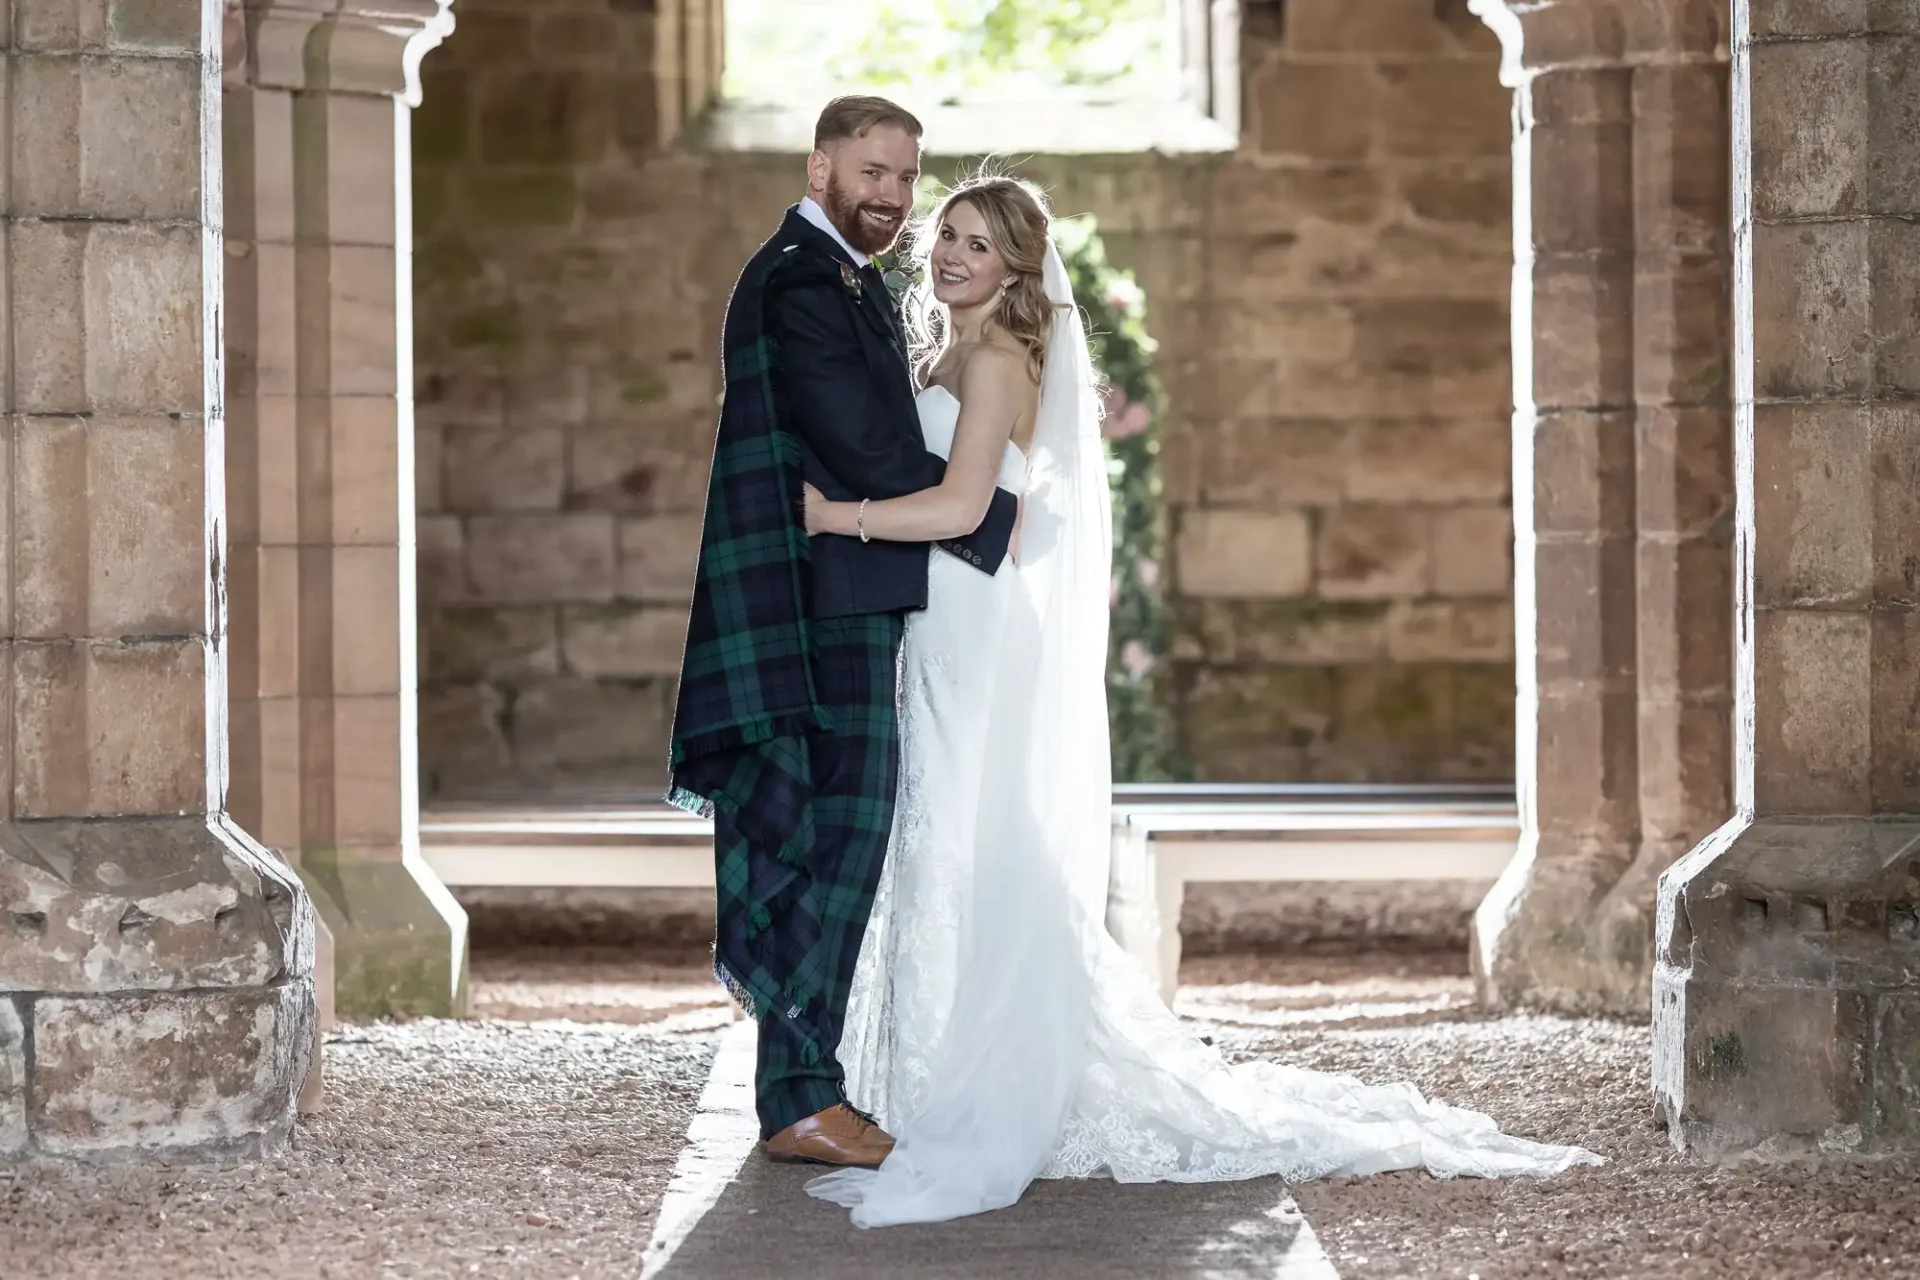 A bride and groom smile and embrace each other in a historic stone corridor, with the groom in a kilt and the bride in a long white dress.